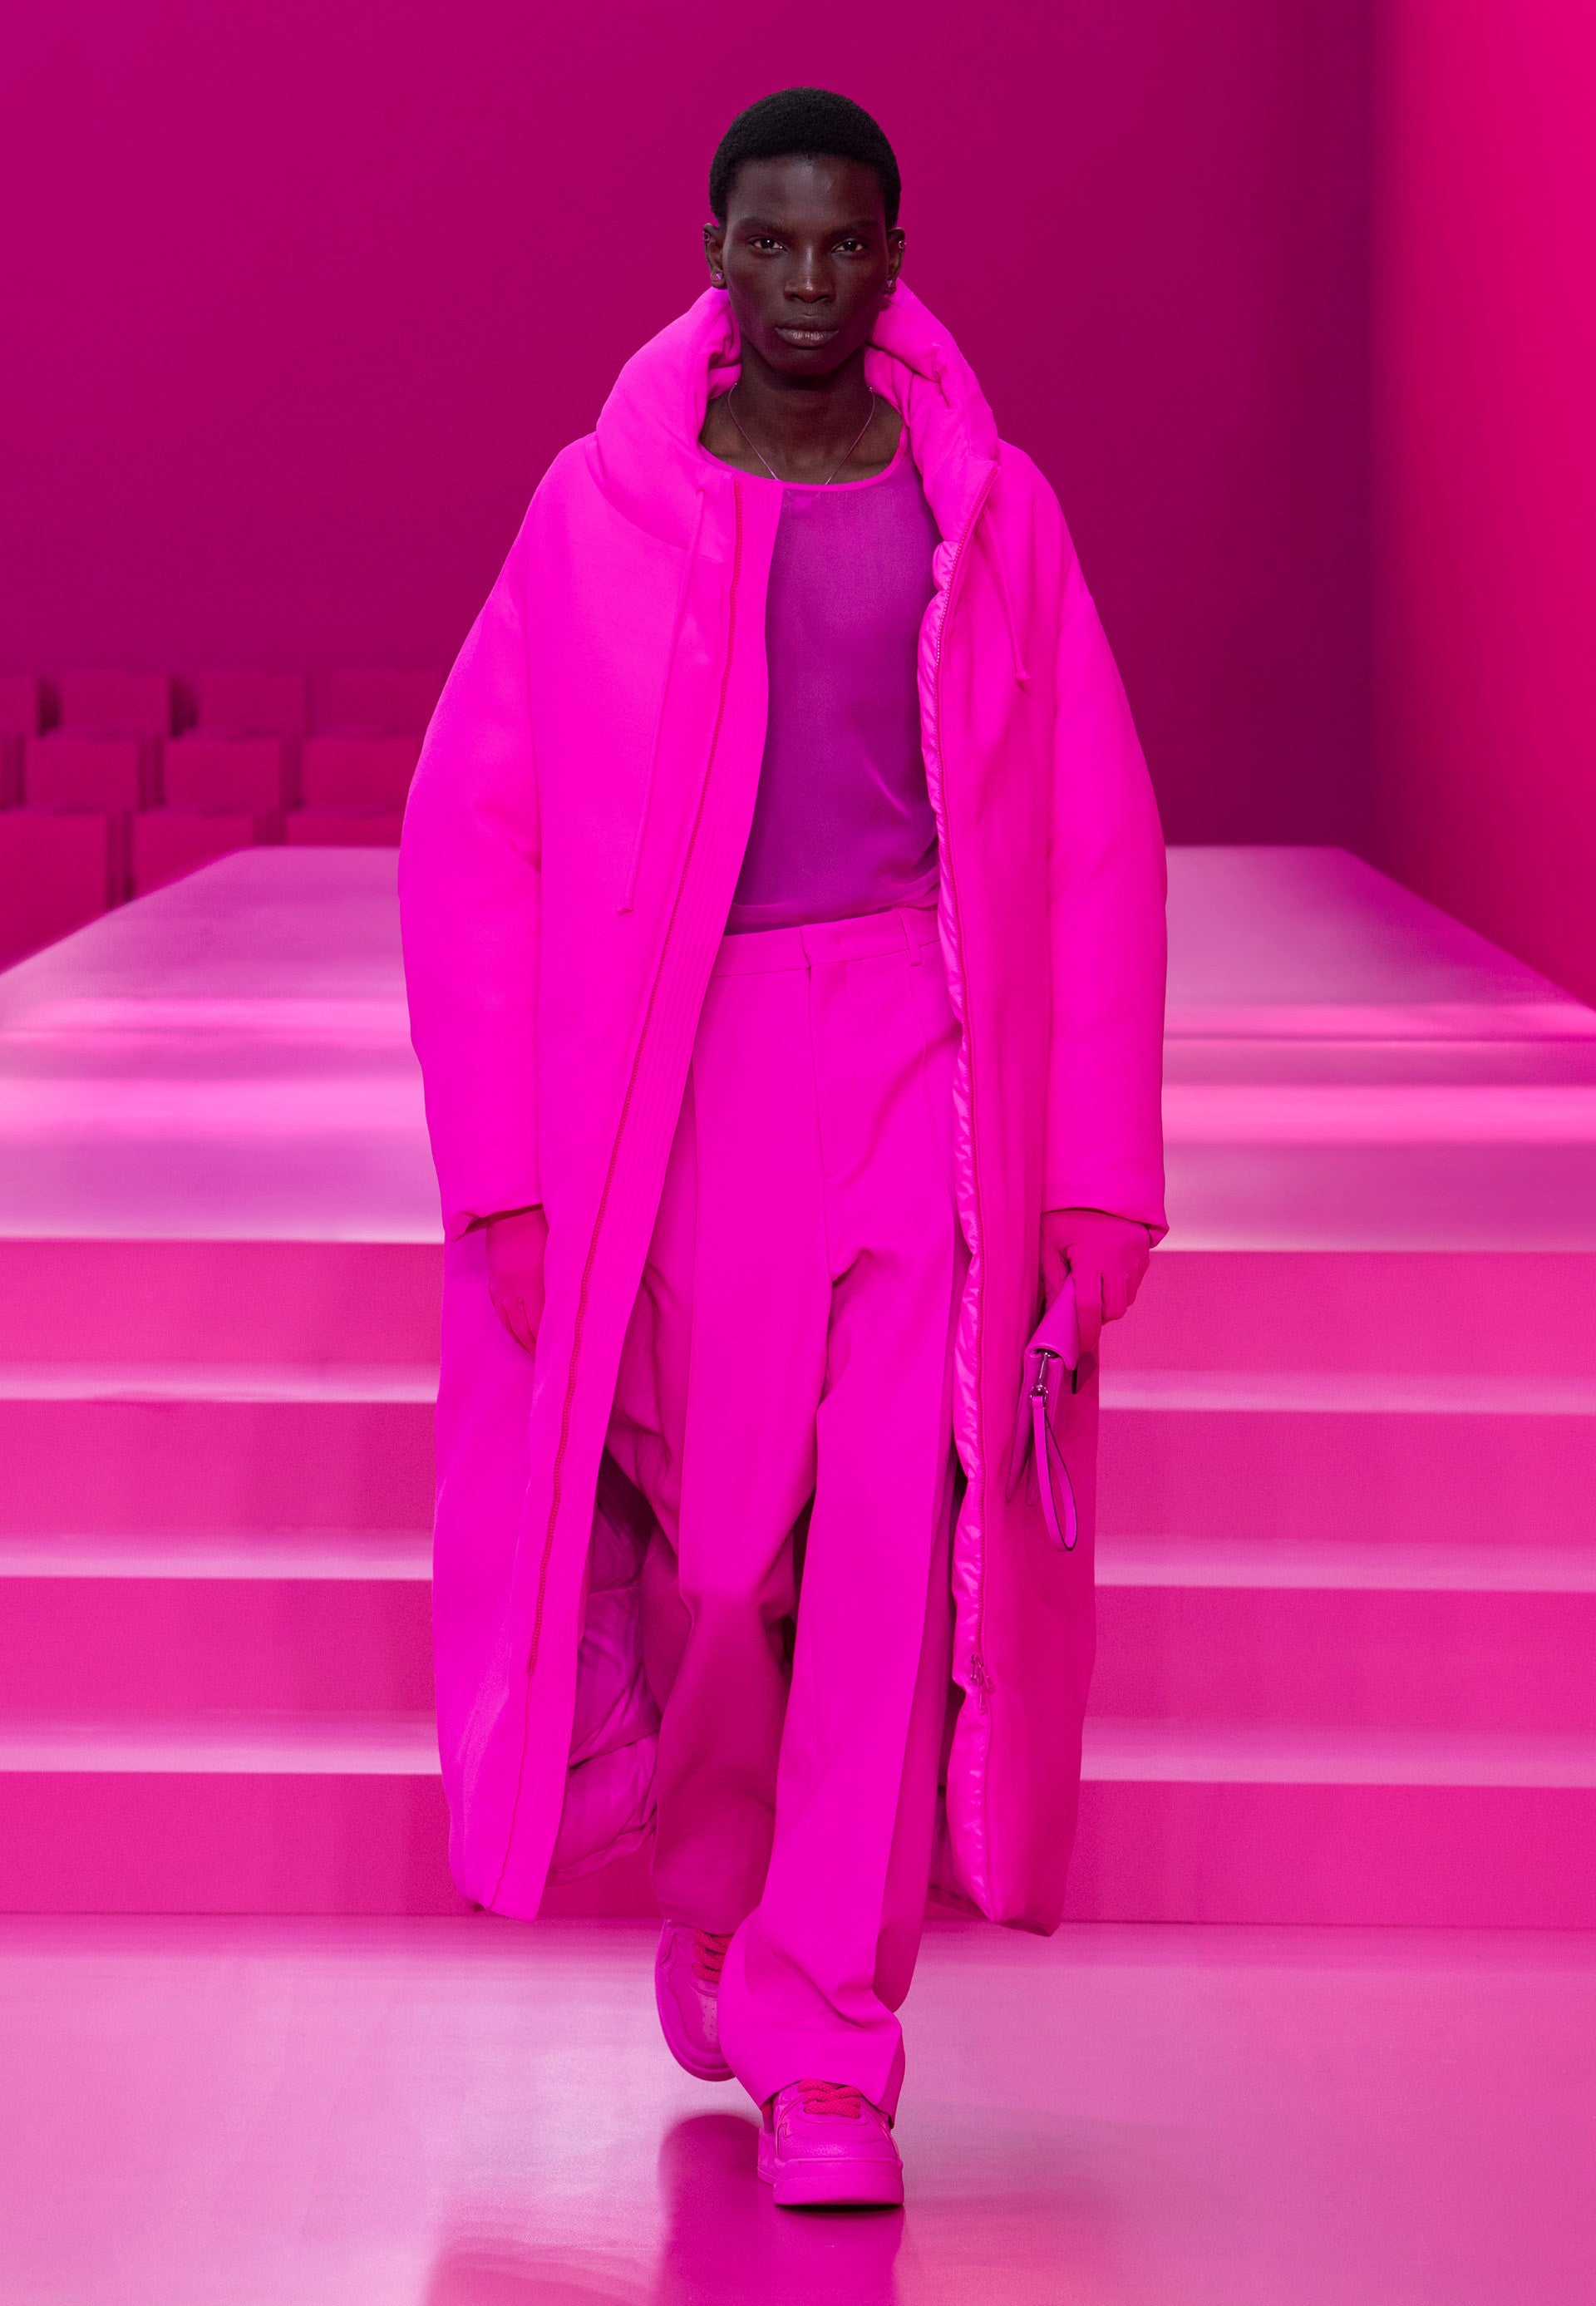 Hot Pink Color: Everything You Need to Know